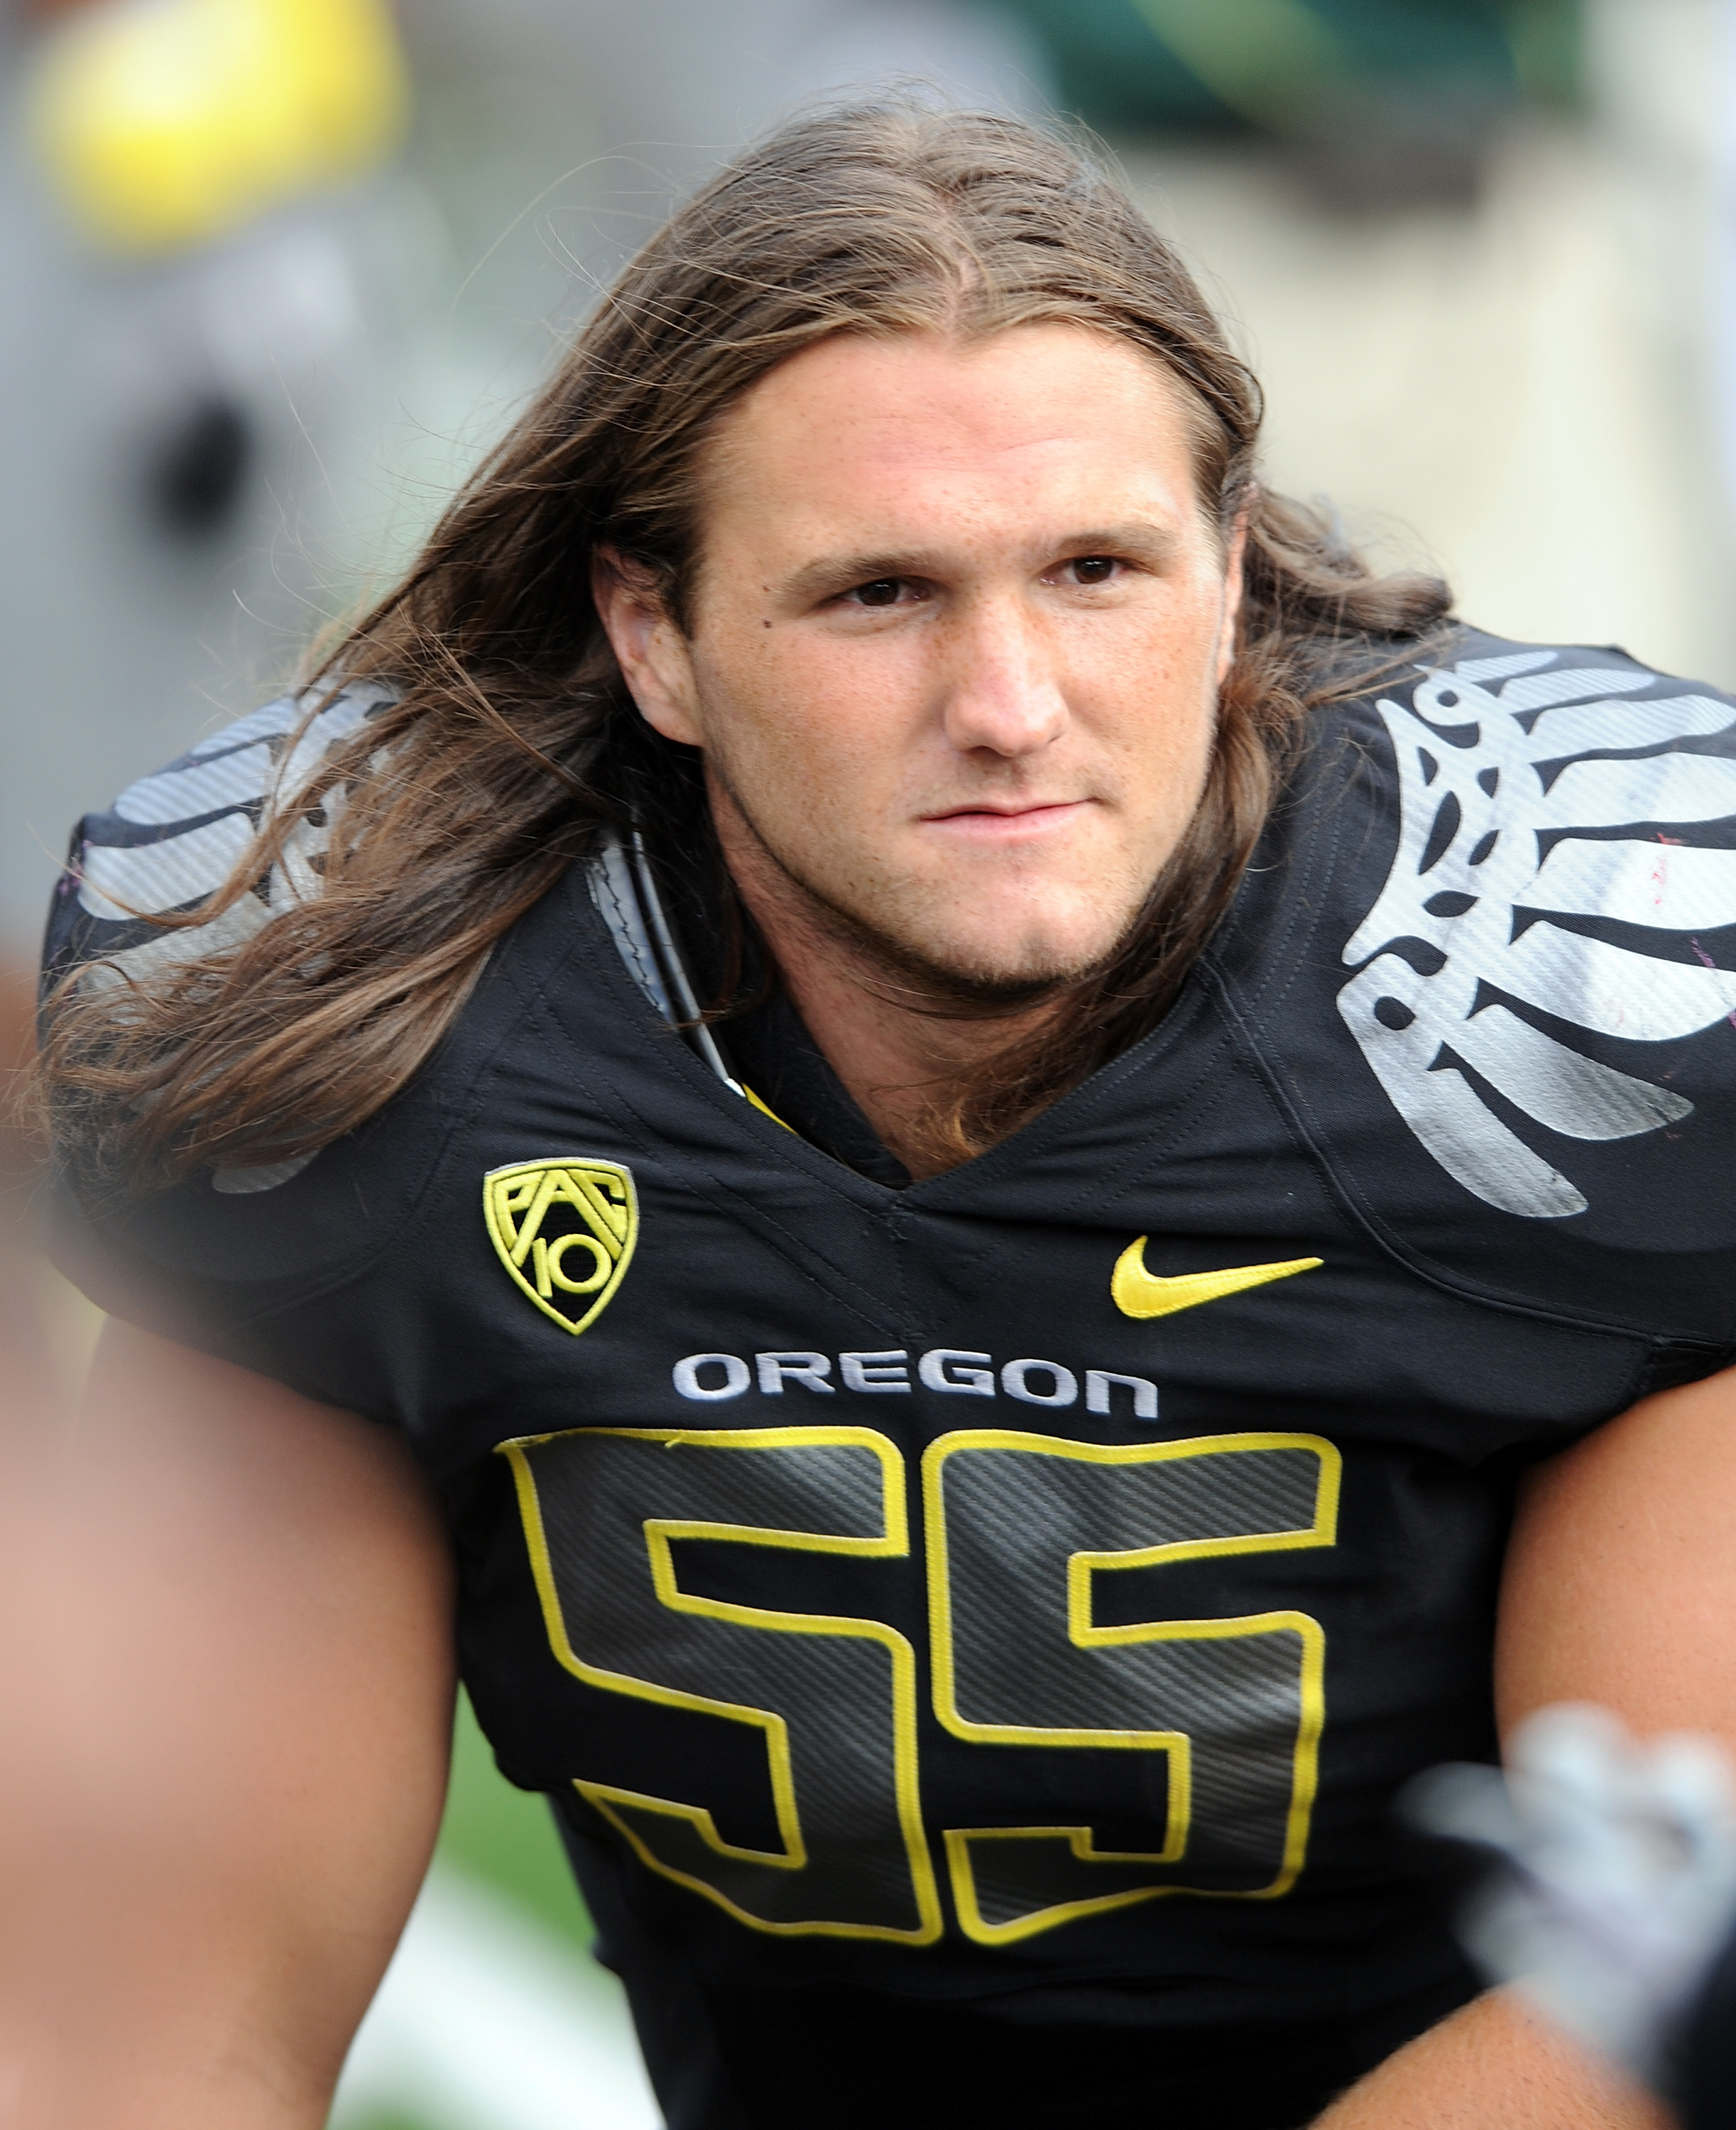 EUGENE, OR - SEPTEMBER 04:  Linebacker Casey Matthews #55 of the Oregon Ducks watches the action from the sidelines in the third quarter of the game against the New Mexico Lobos at Autzen Stadium on September 4, 2010 in Eugene, Oregon. Oregon won the game